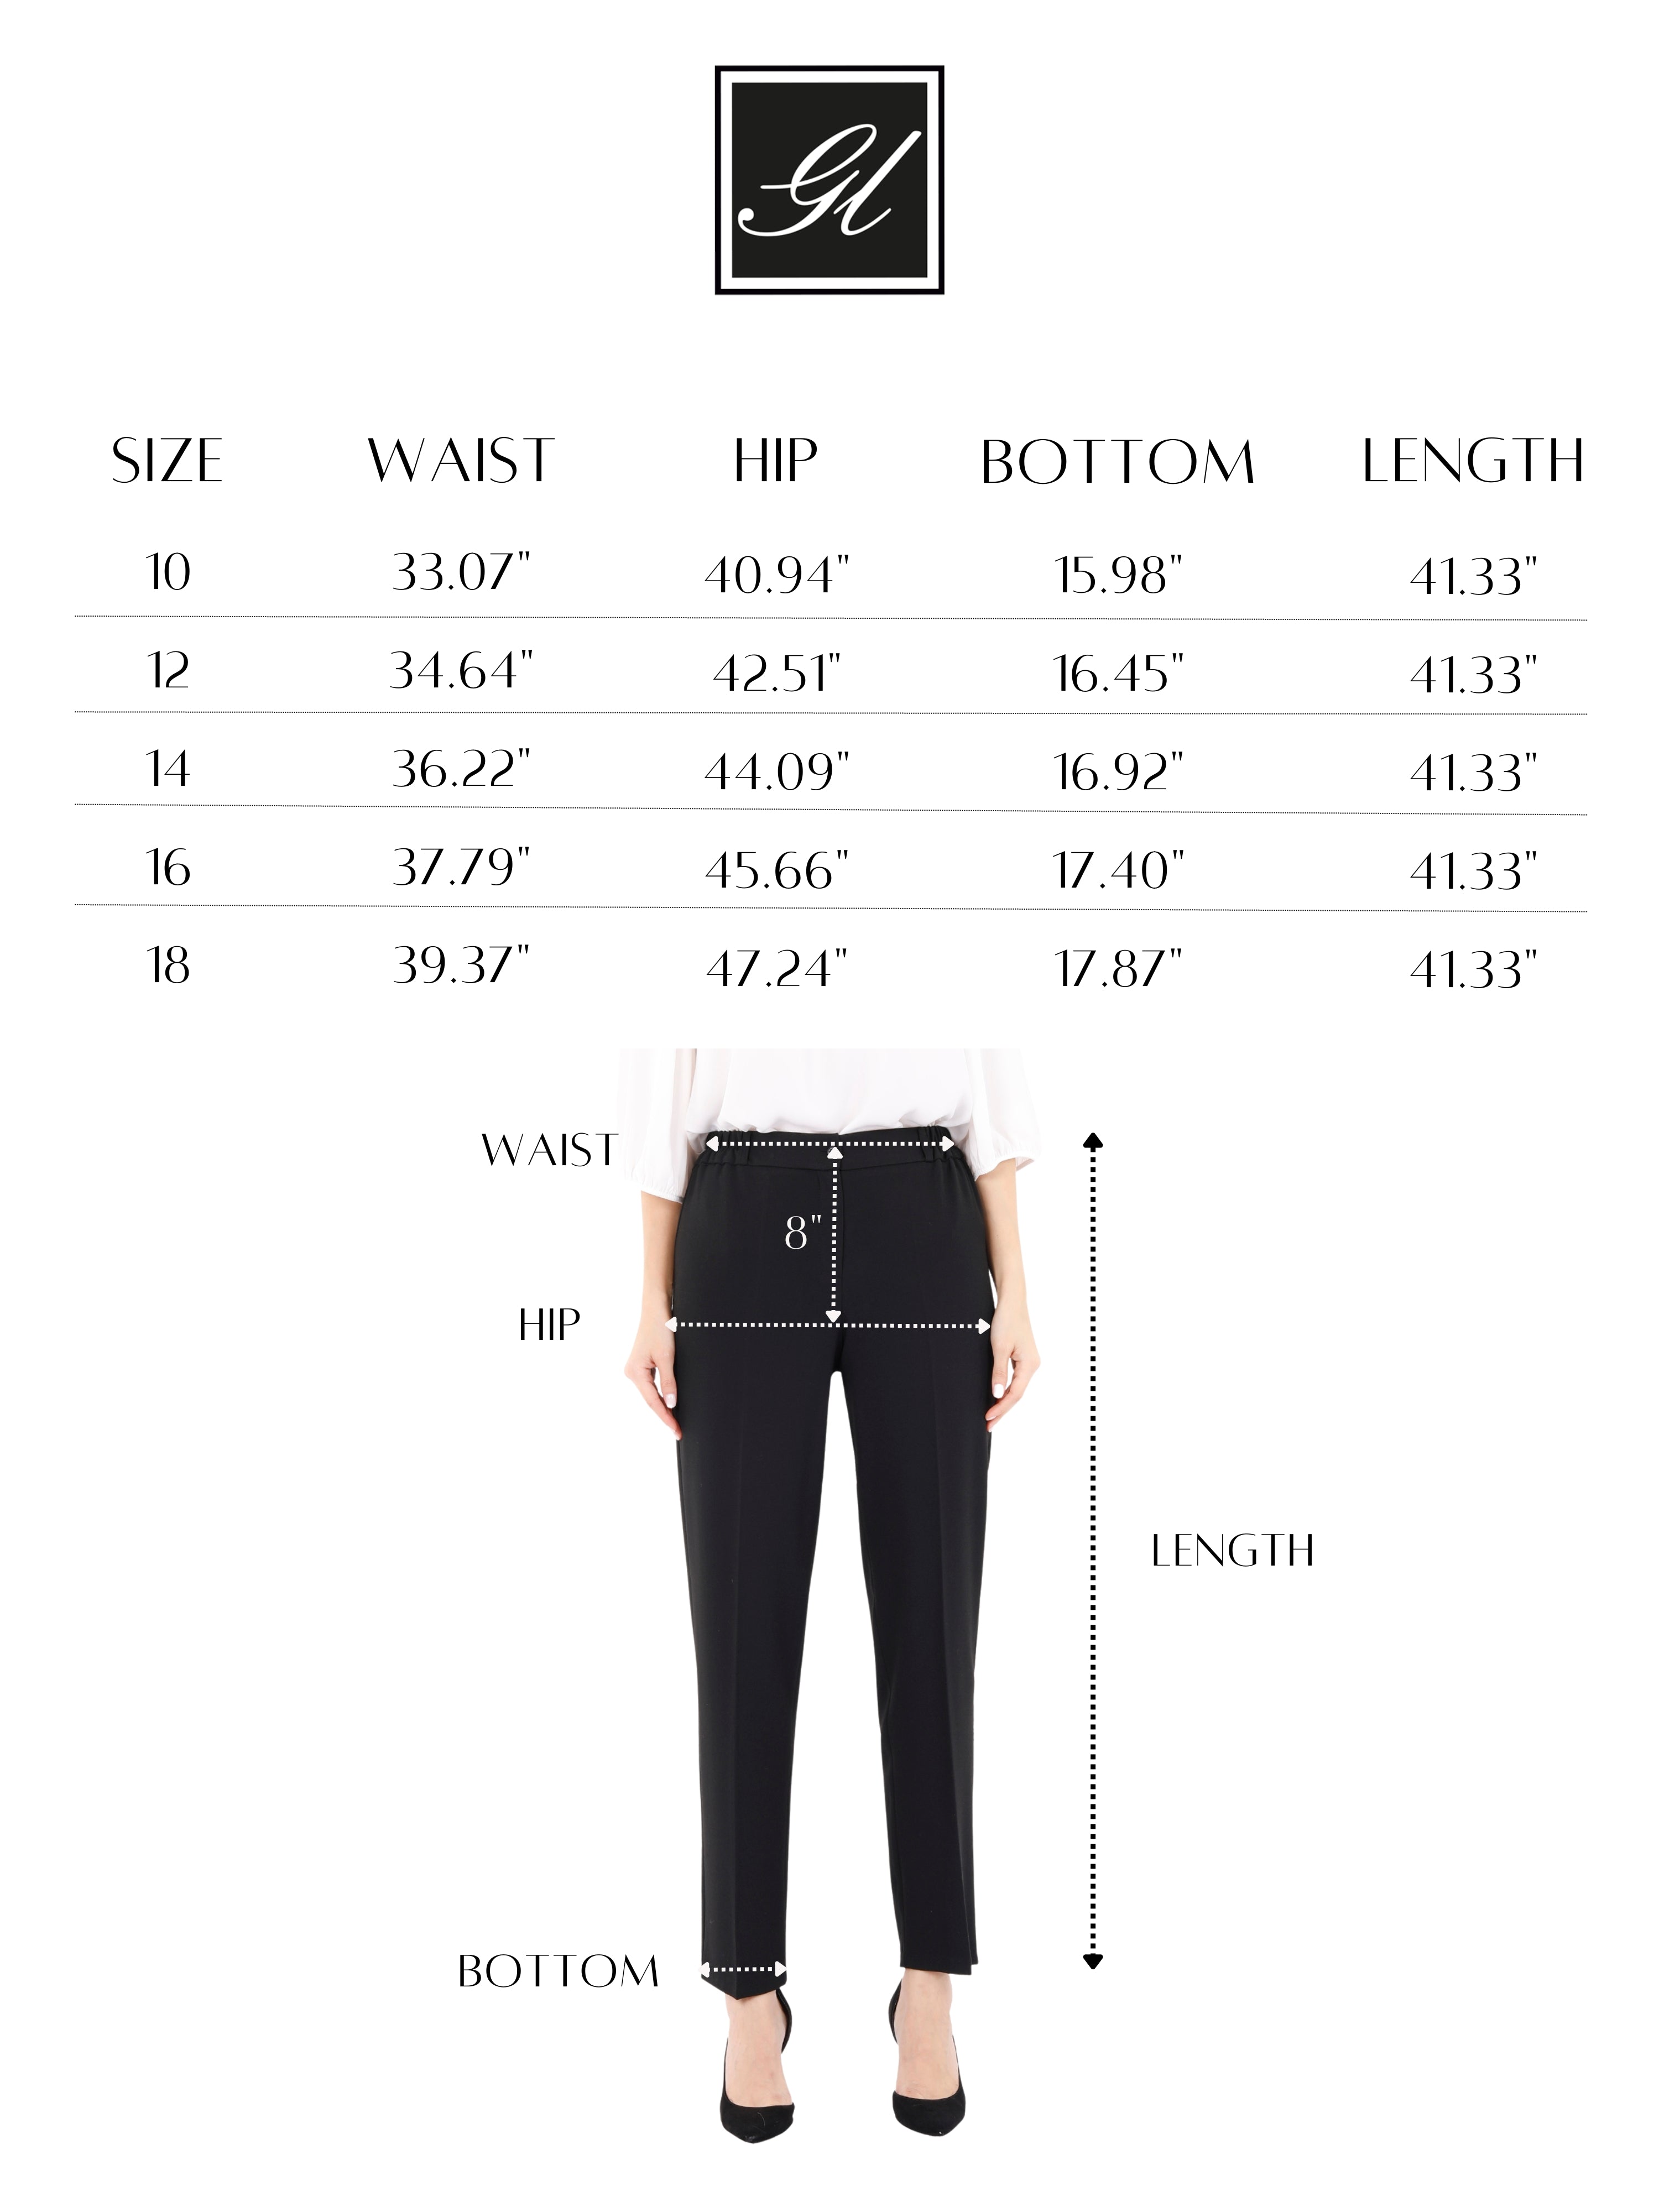 Straight Black Pants with Elastic Waistband and Zipper Combined